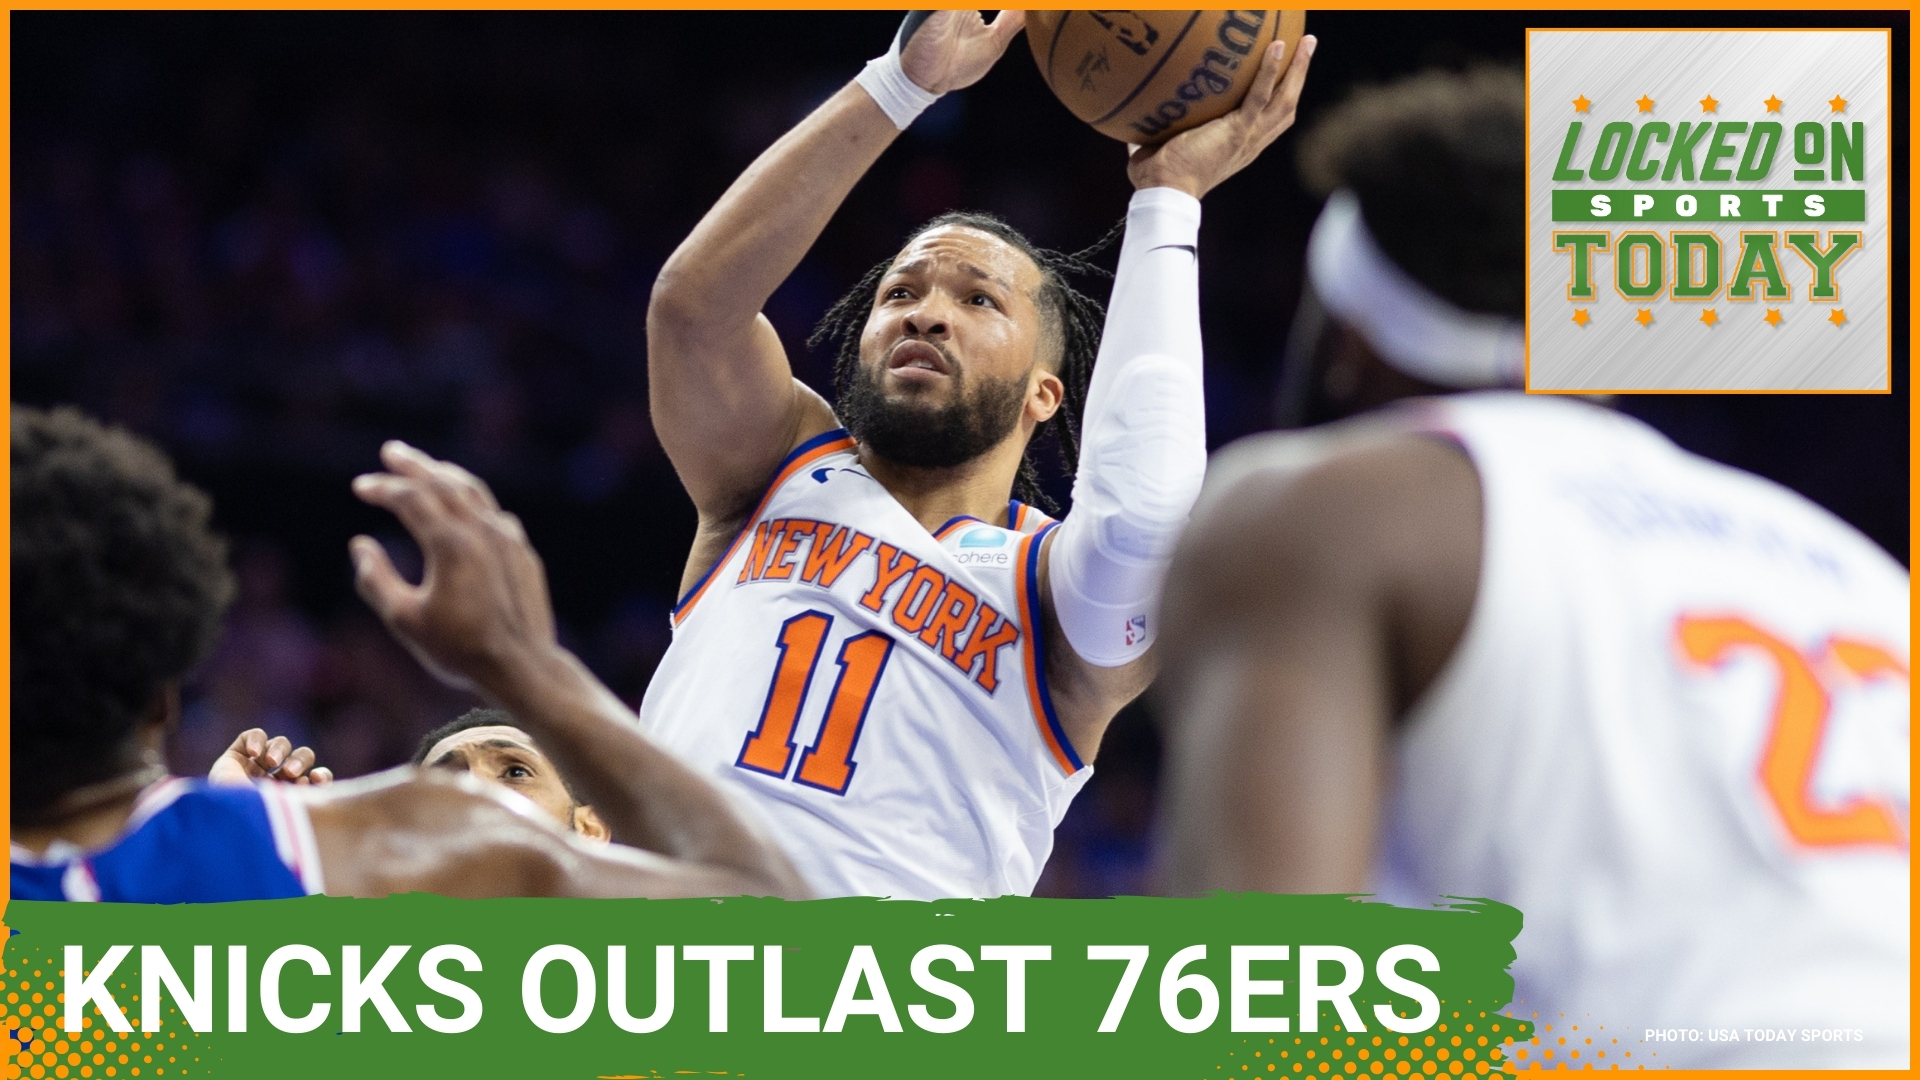 The New York Knicks outlast the Philadelphia 76ers in the NBA Playoffs. The Denver Nuggets tortured LeBron James and the Los Angeles Lakers.